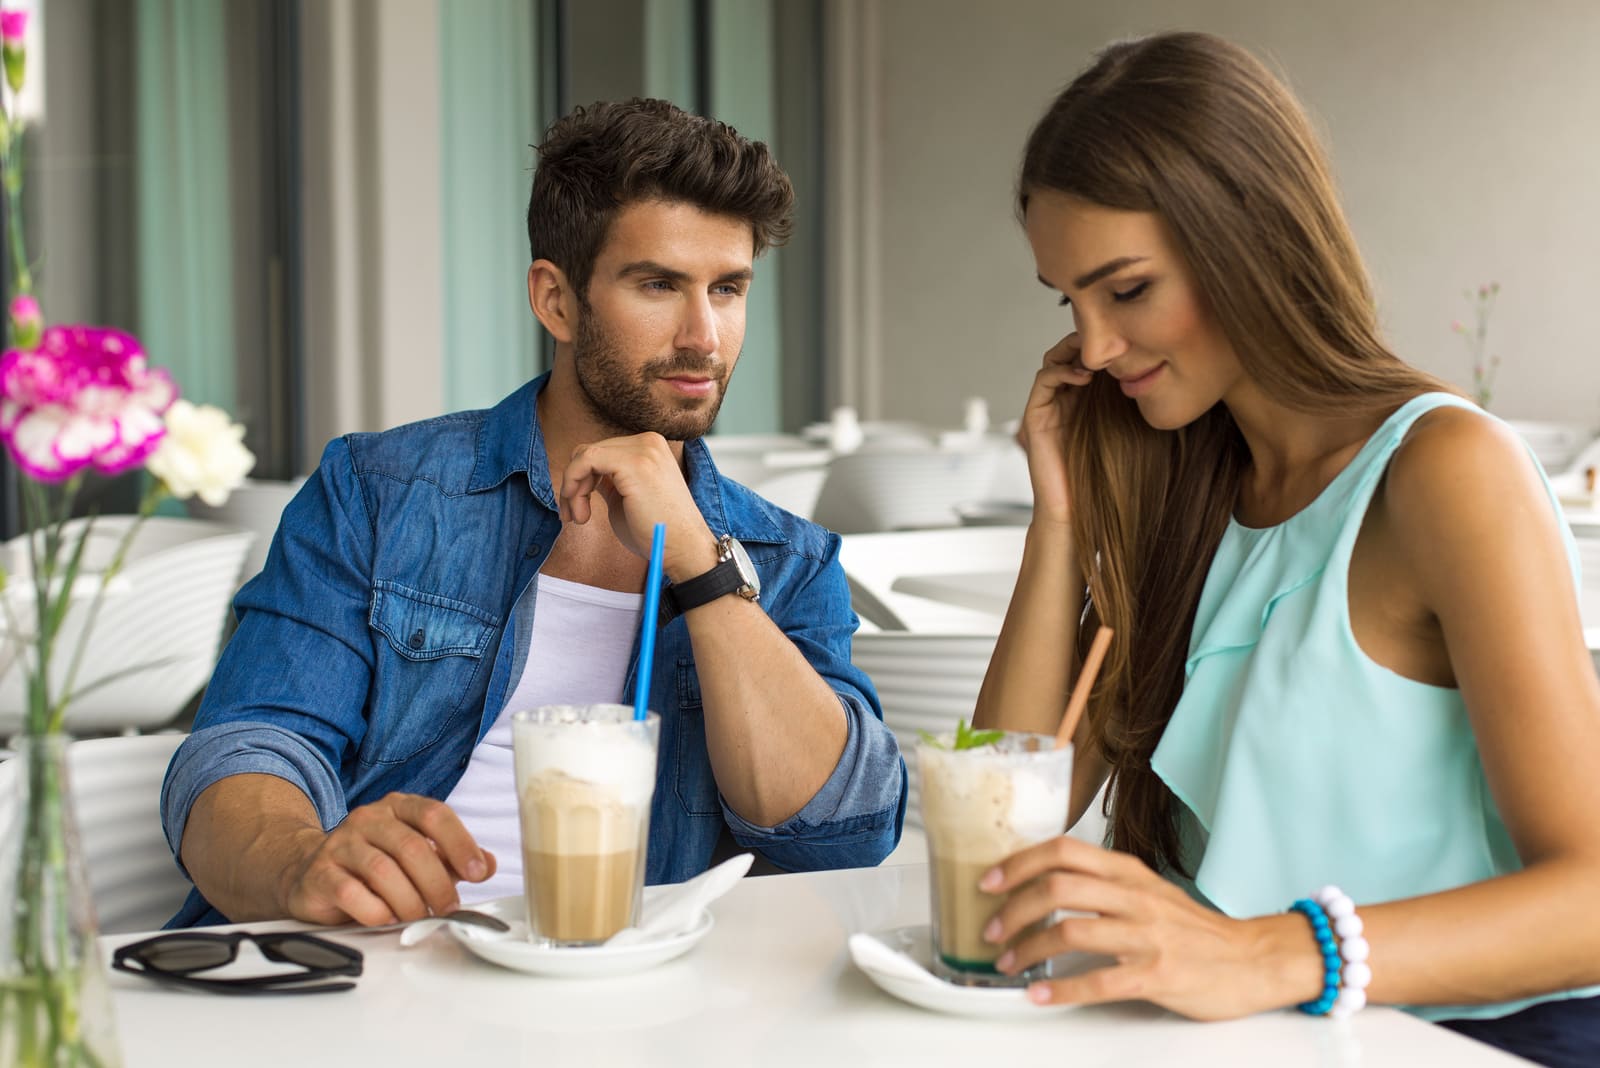 a man and a woman are sitting drinking hot chocolate.